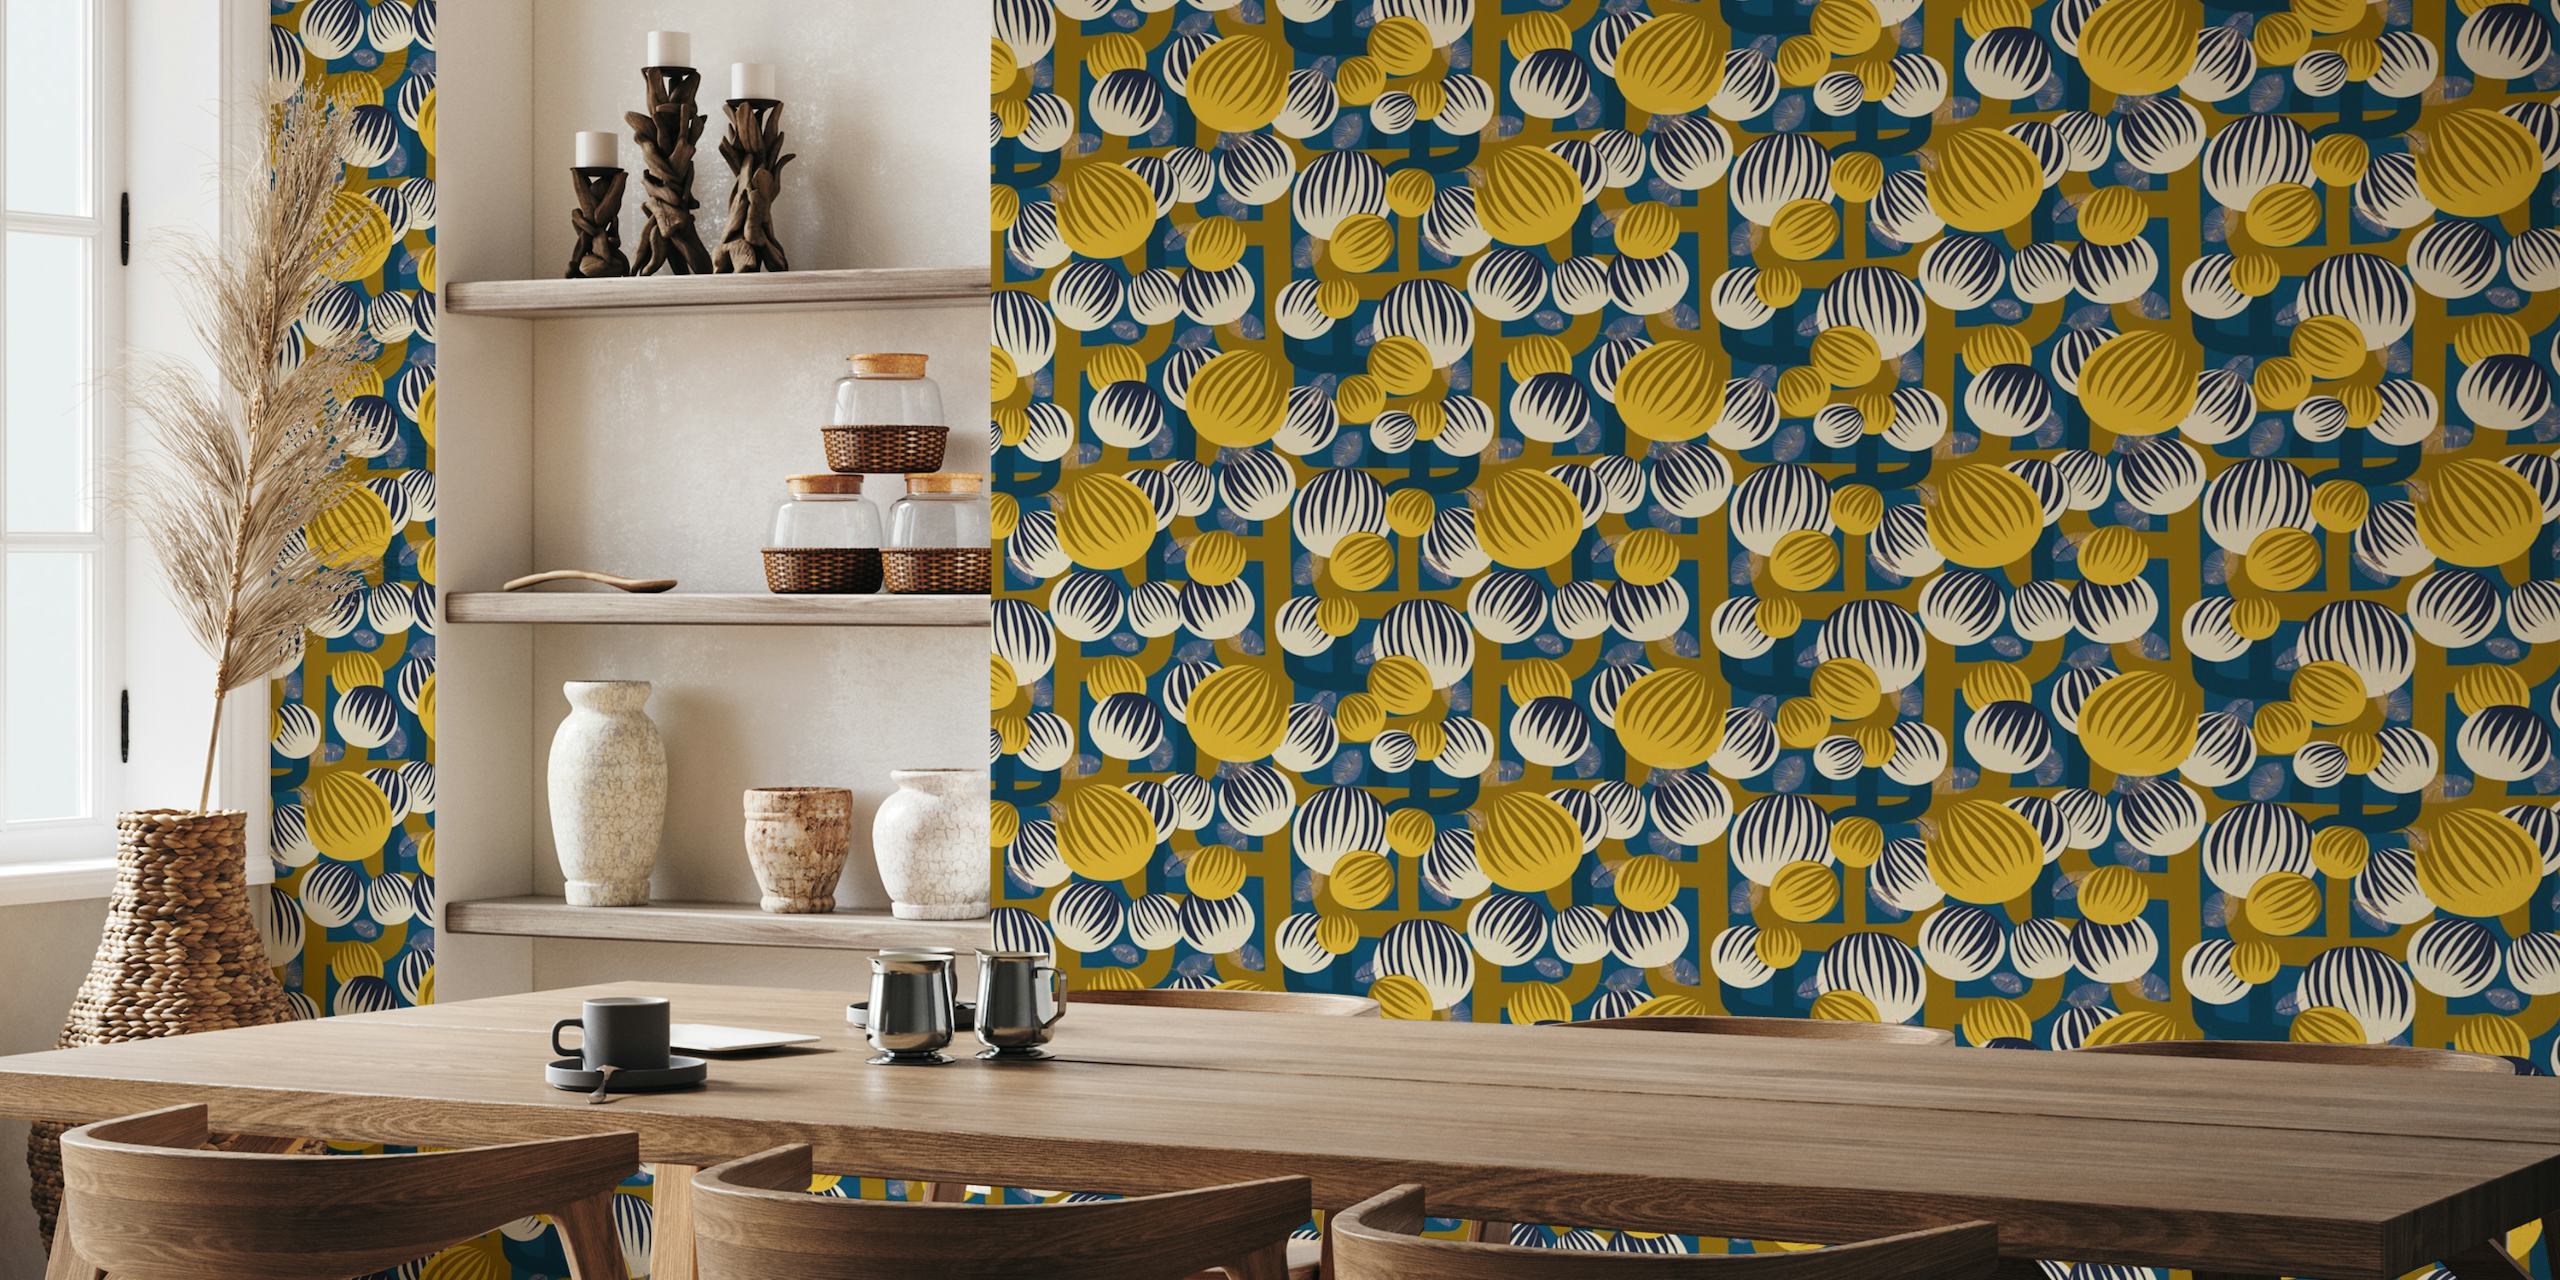 Retro-styled pop art bubble flowers in gold, cream, and navy colors on a wall mural